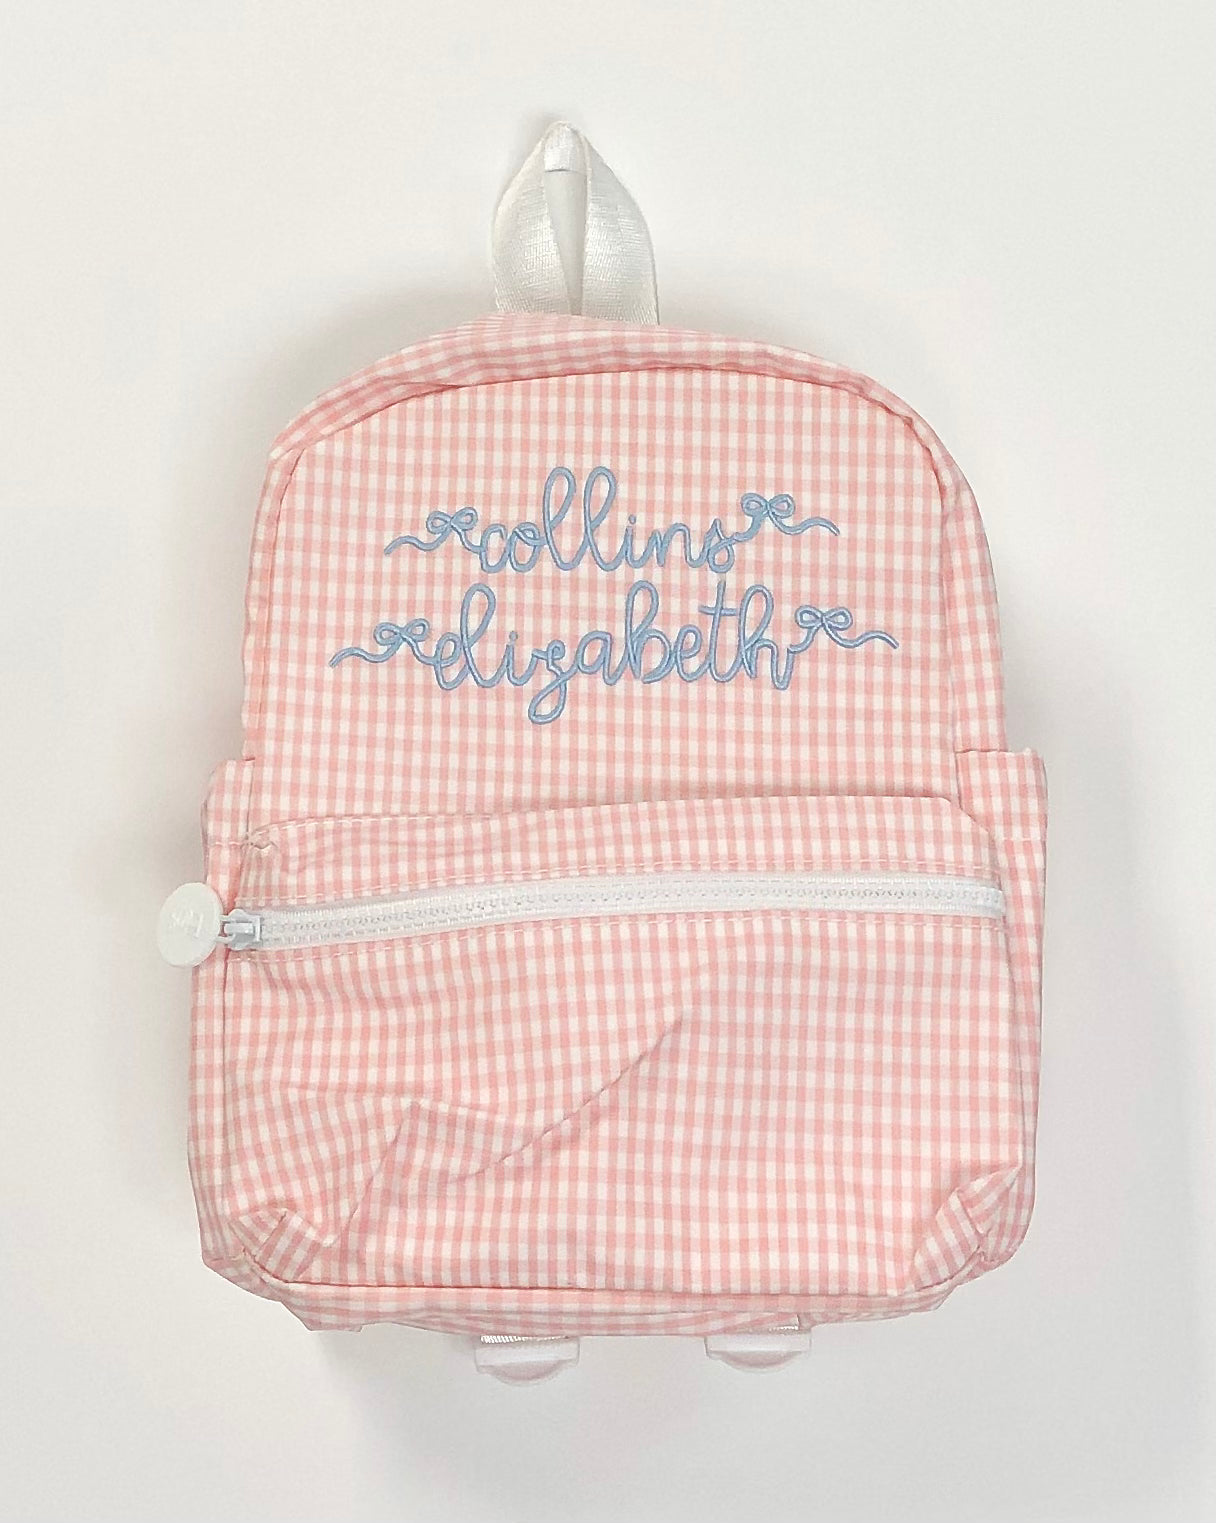 Camo Backpack and Lunchbox Set – The Gingham Tiger